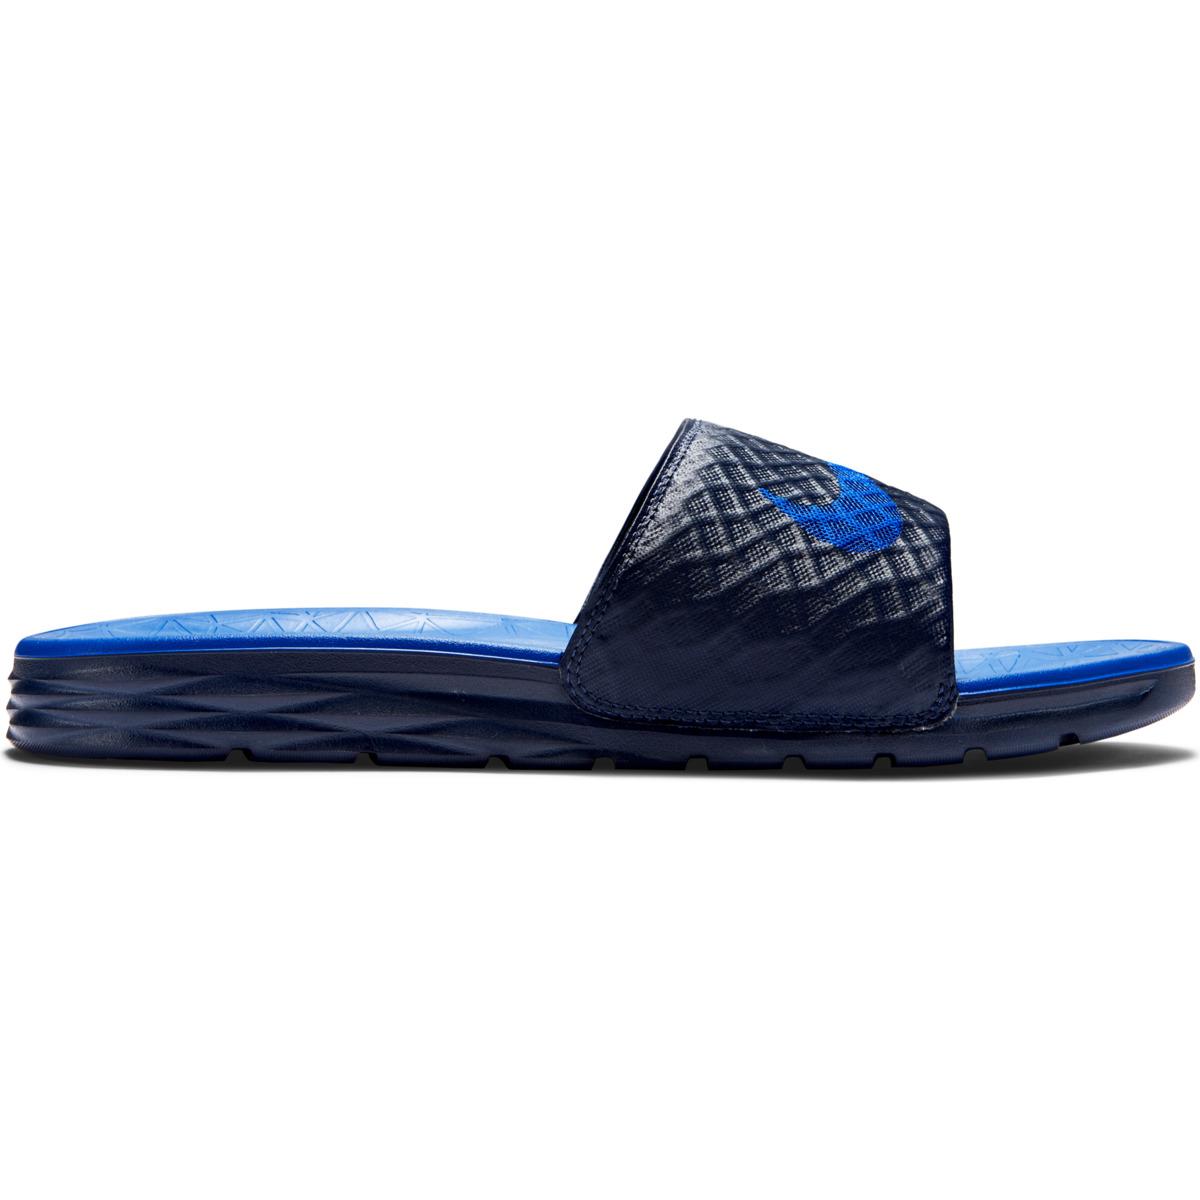  Nike  Synthetic Benassi Sandals  in Blue  for Men Lyst